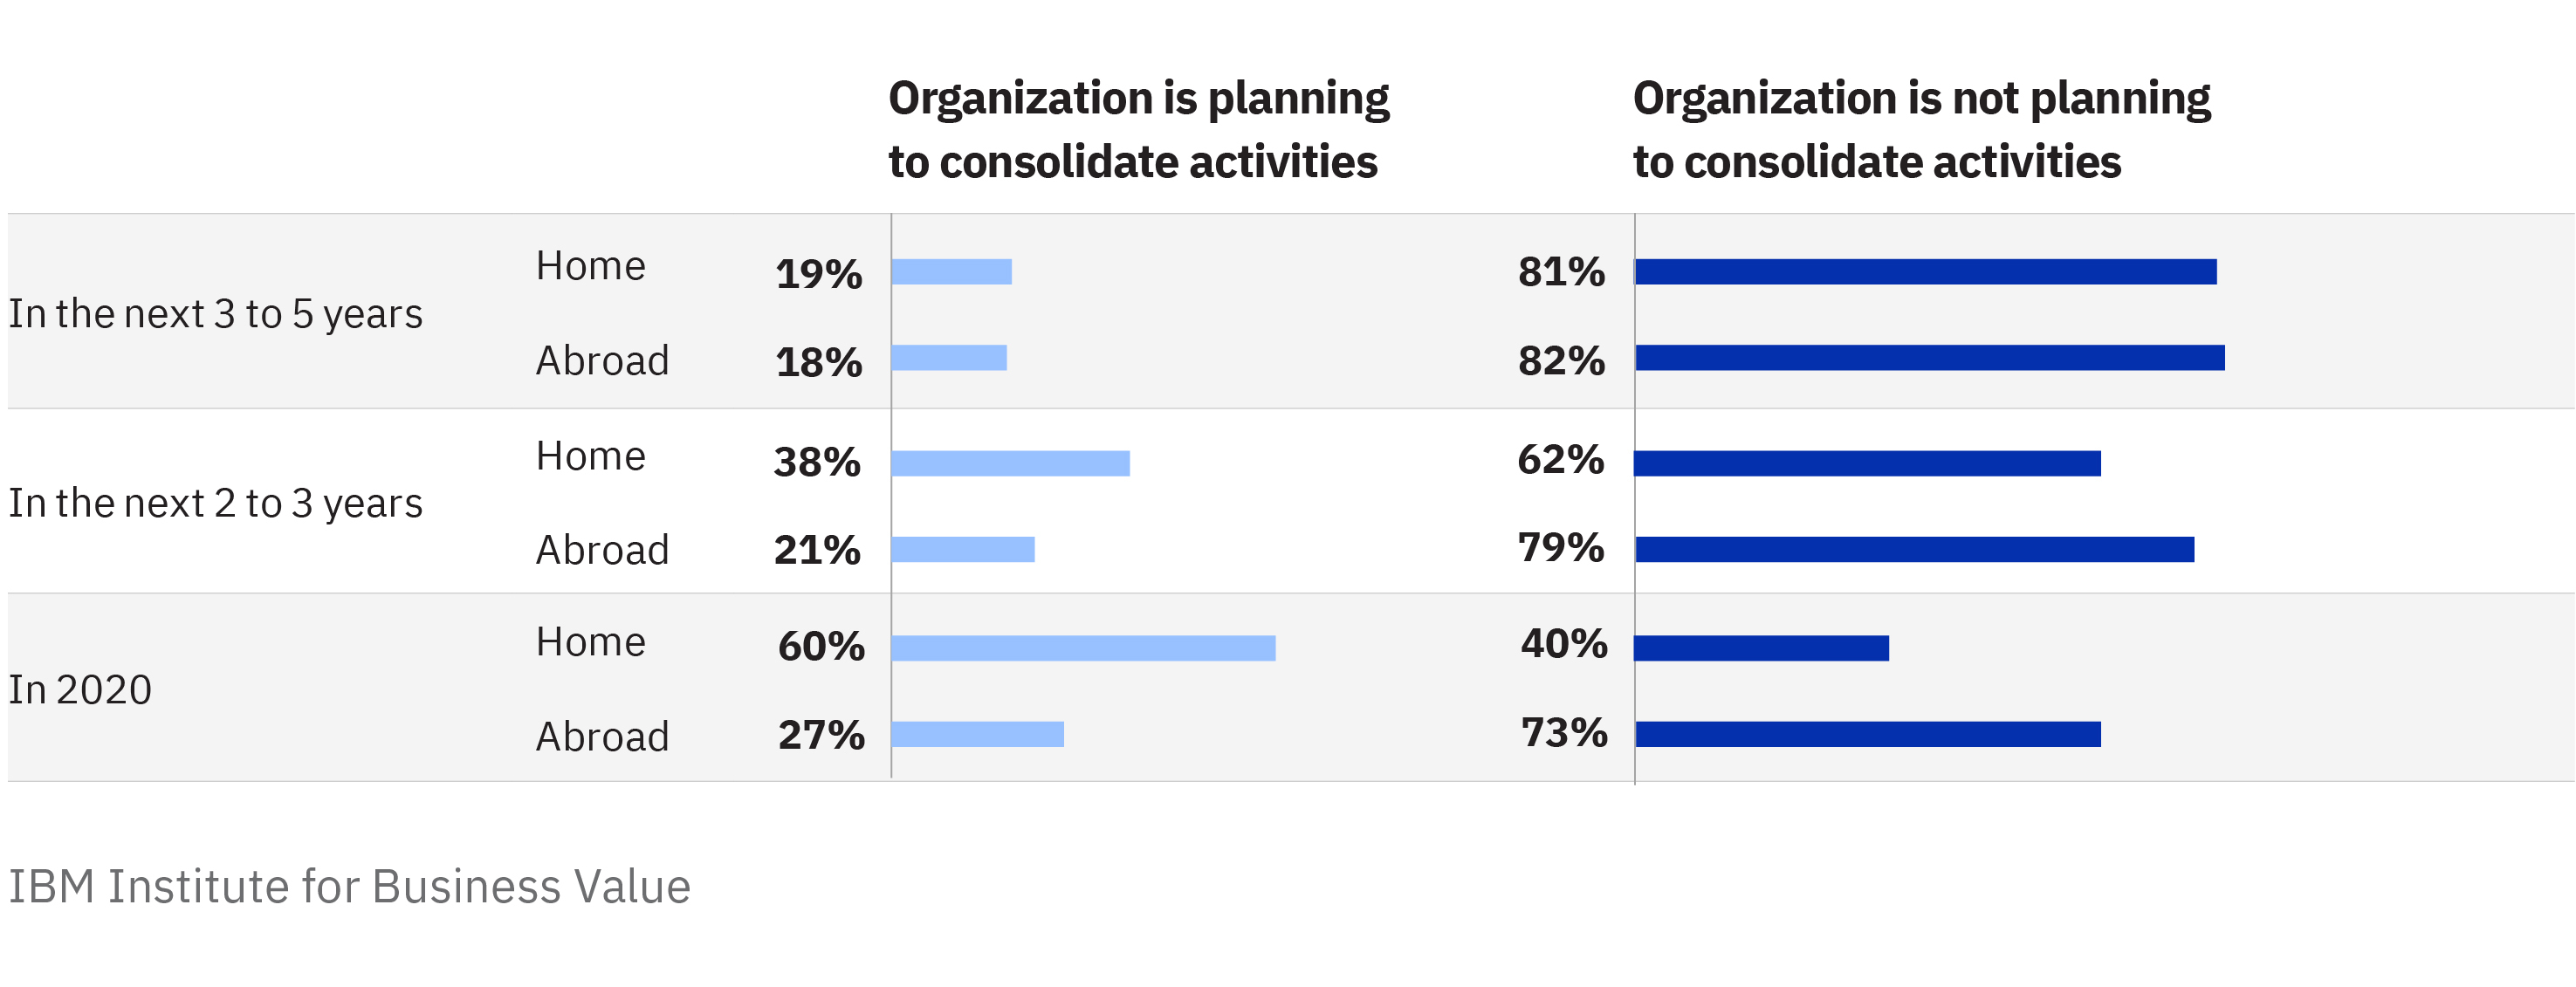 Companies expect to consolidate activities in their home countries in 2020